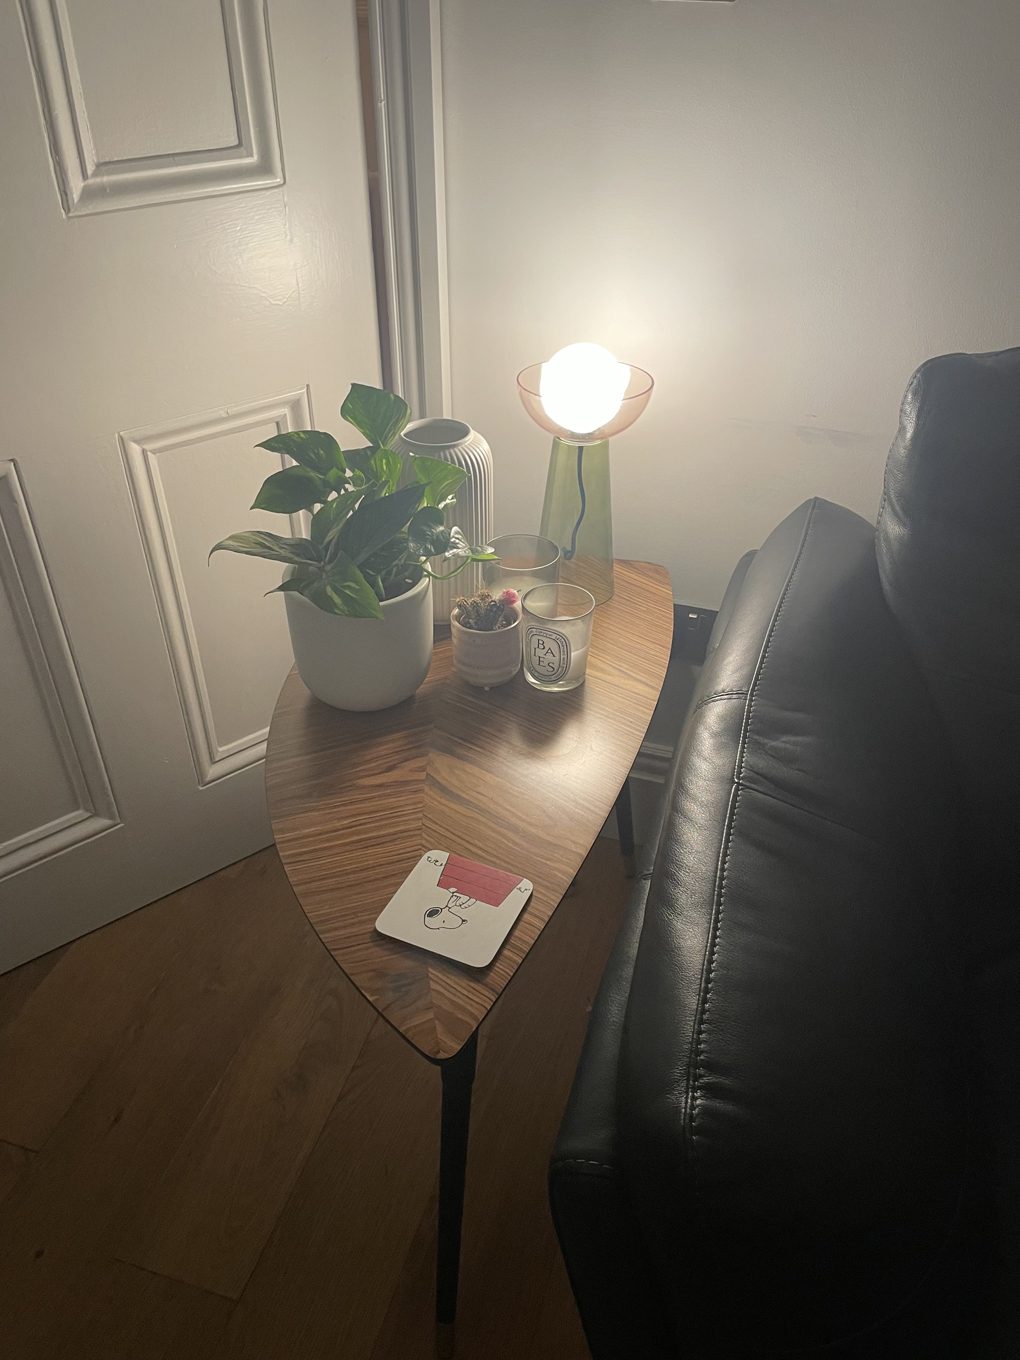 End table with lamp, plant, and candles next to sofa